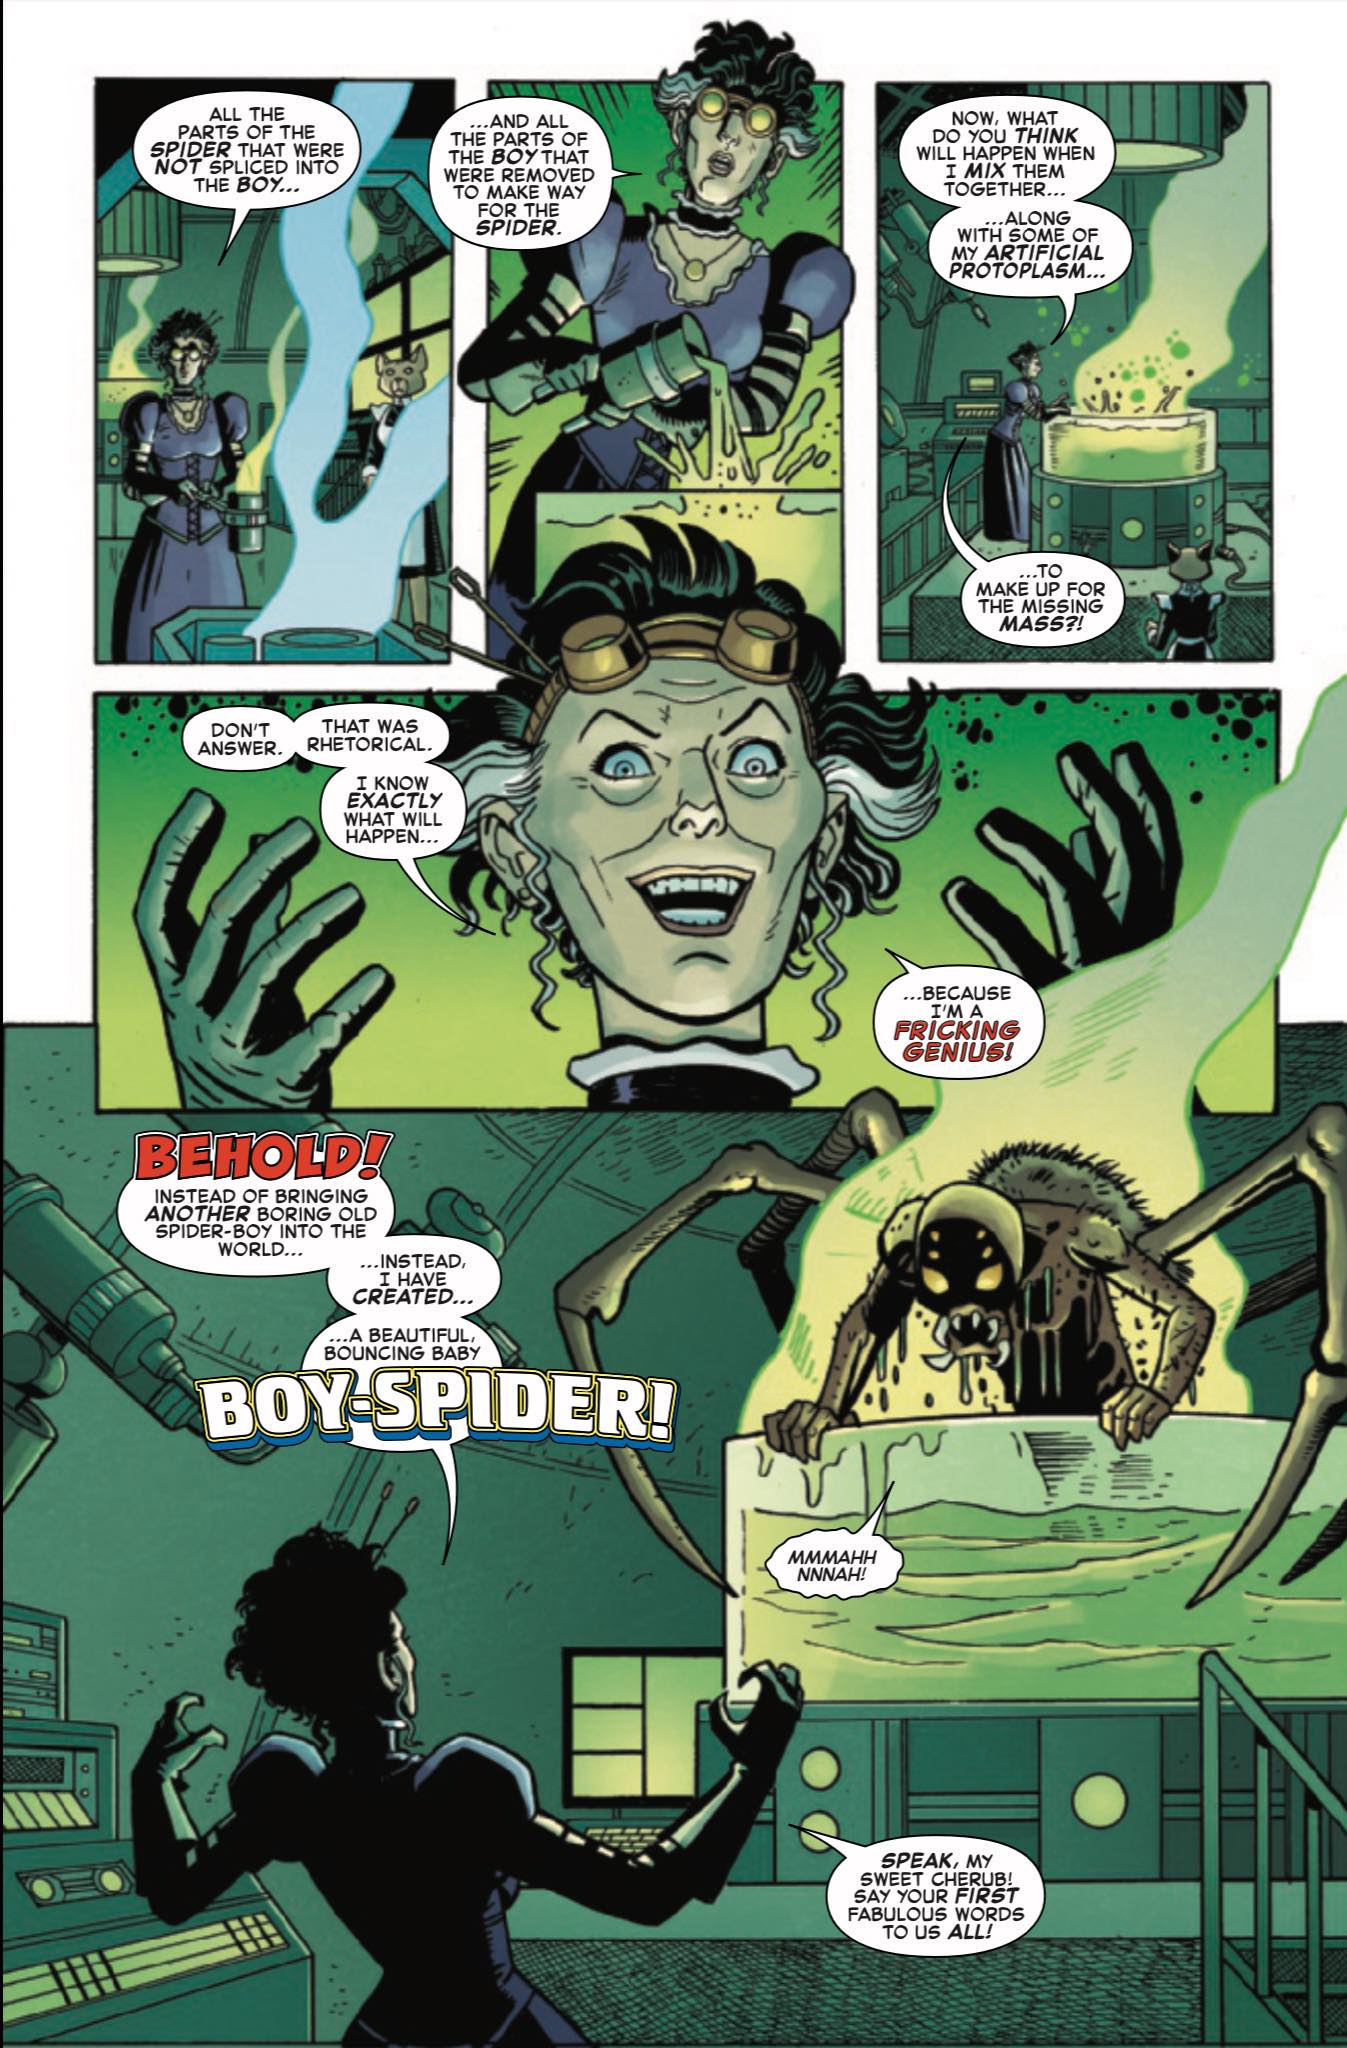 Madame Monstrosity reveals how she created Spider-Boy